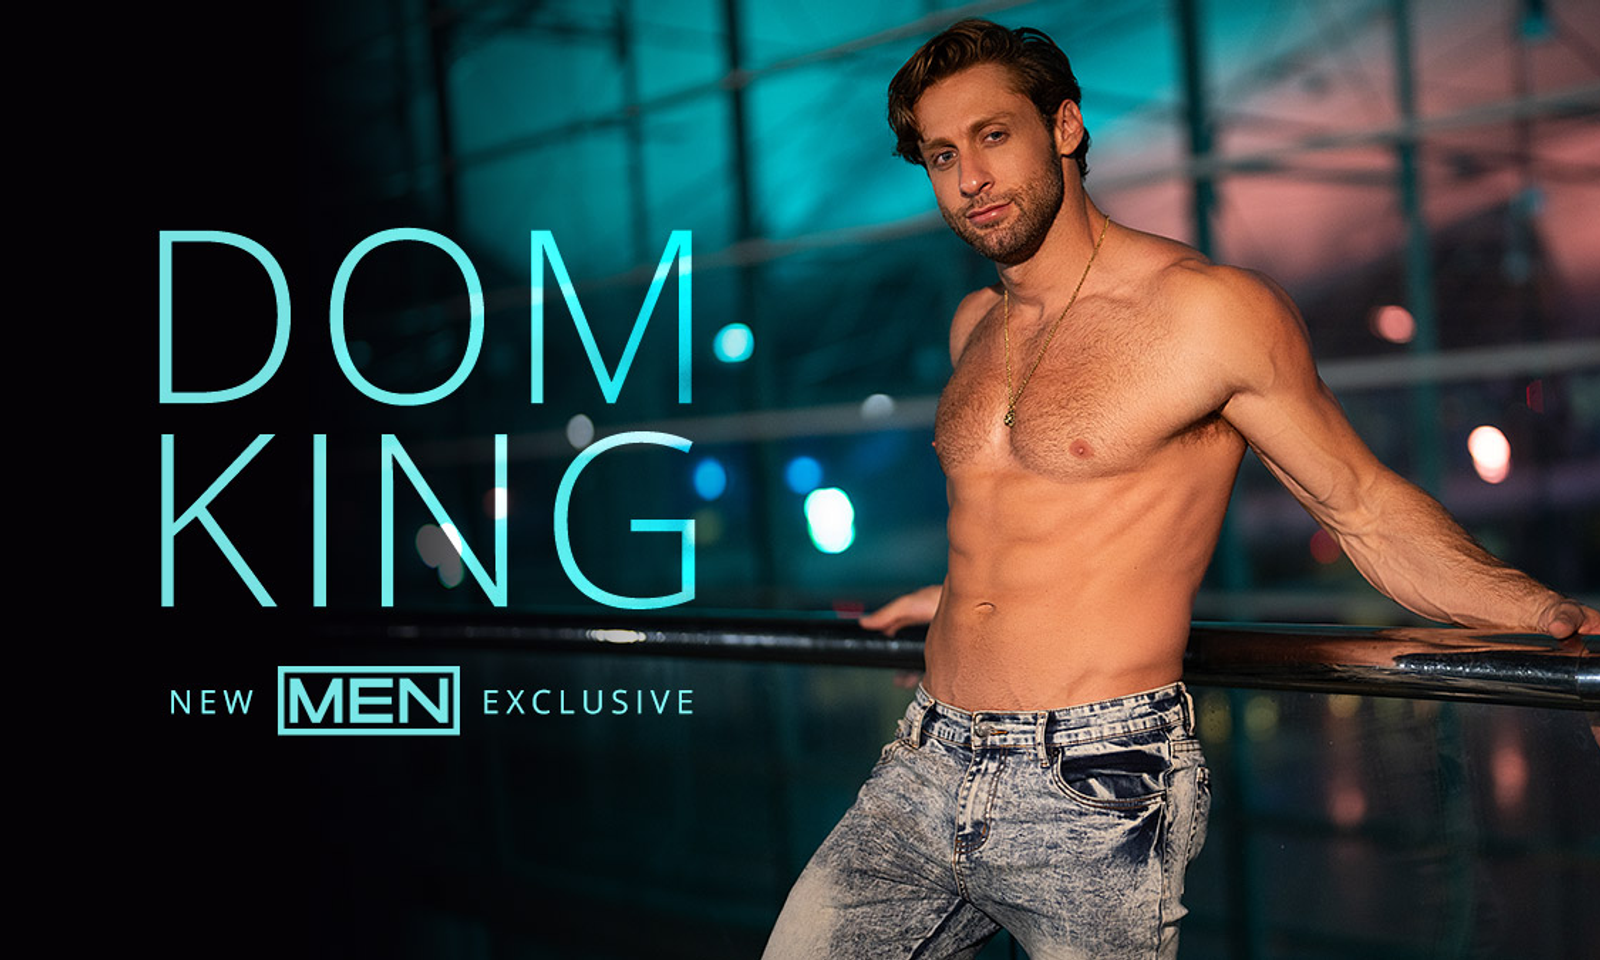 Dom King Signs Exclusive Deal With Men.com